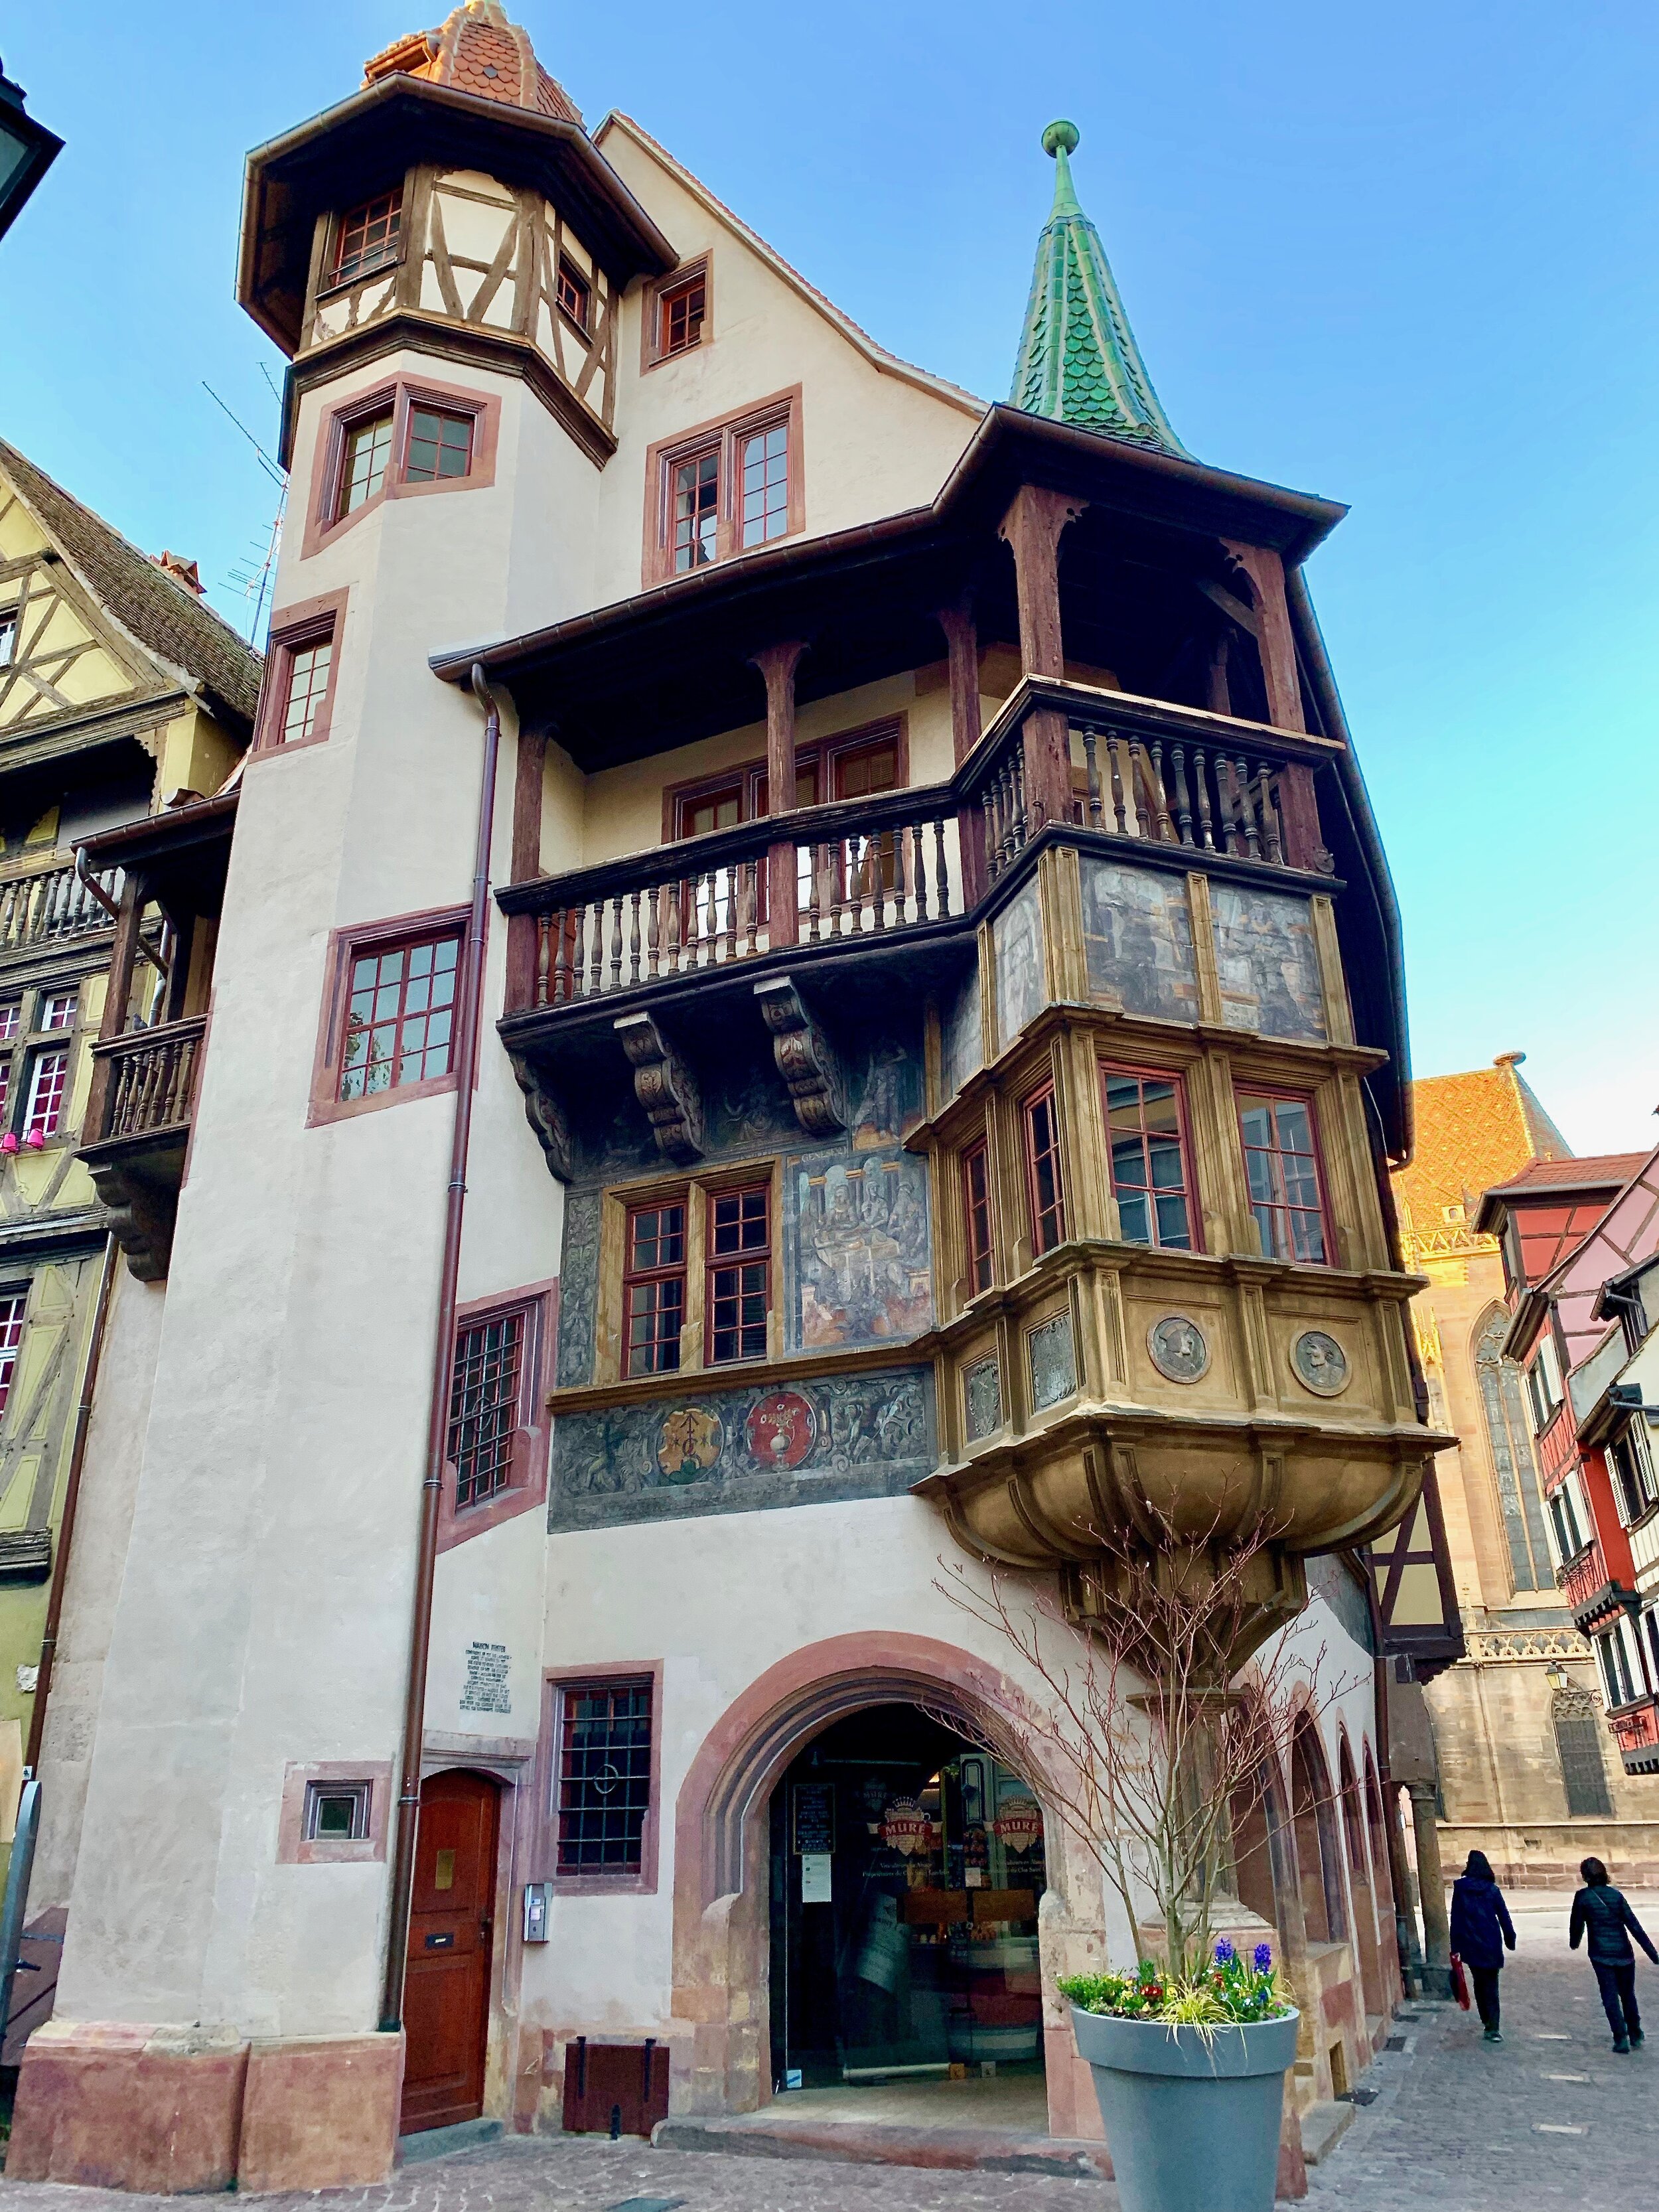 A Wonderful 3 Day Itinerary in Alsace